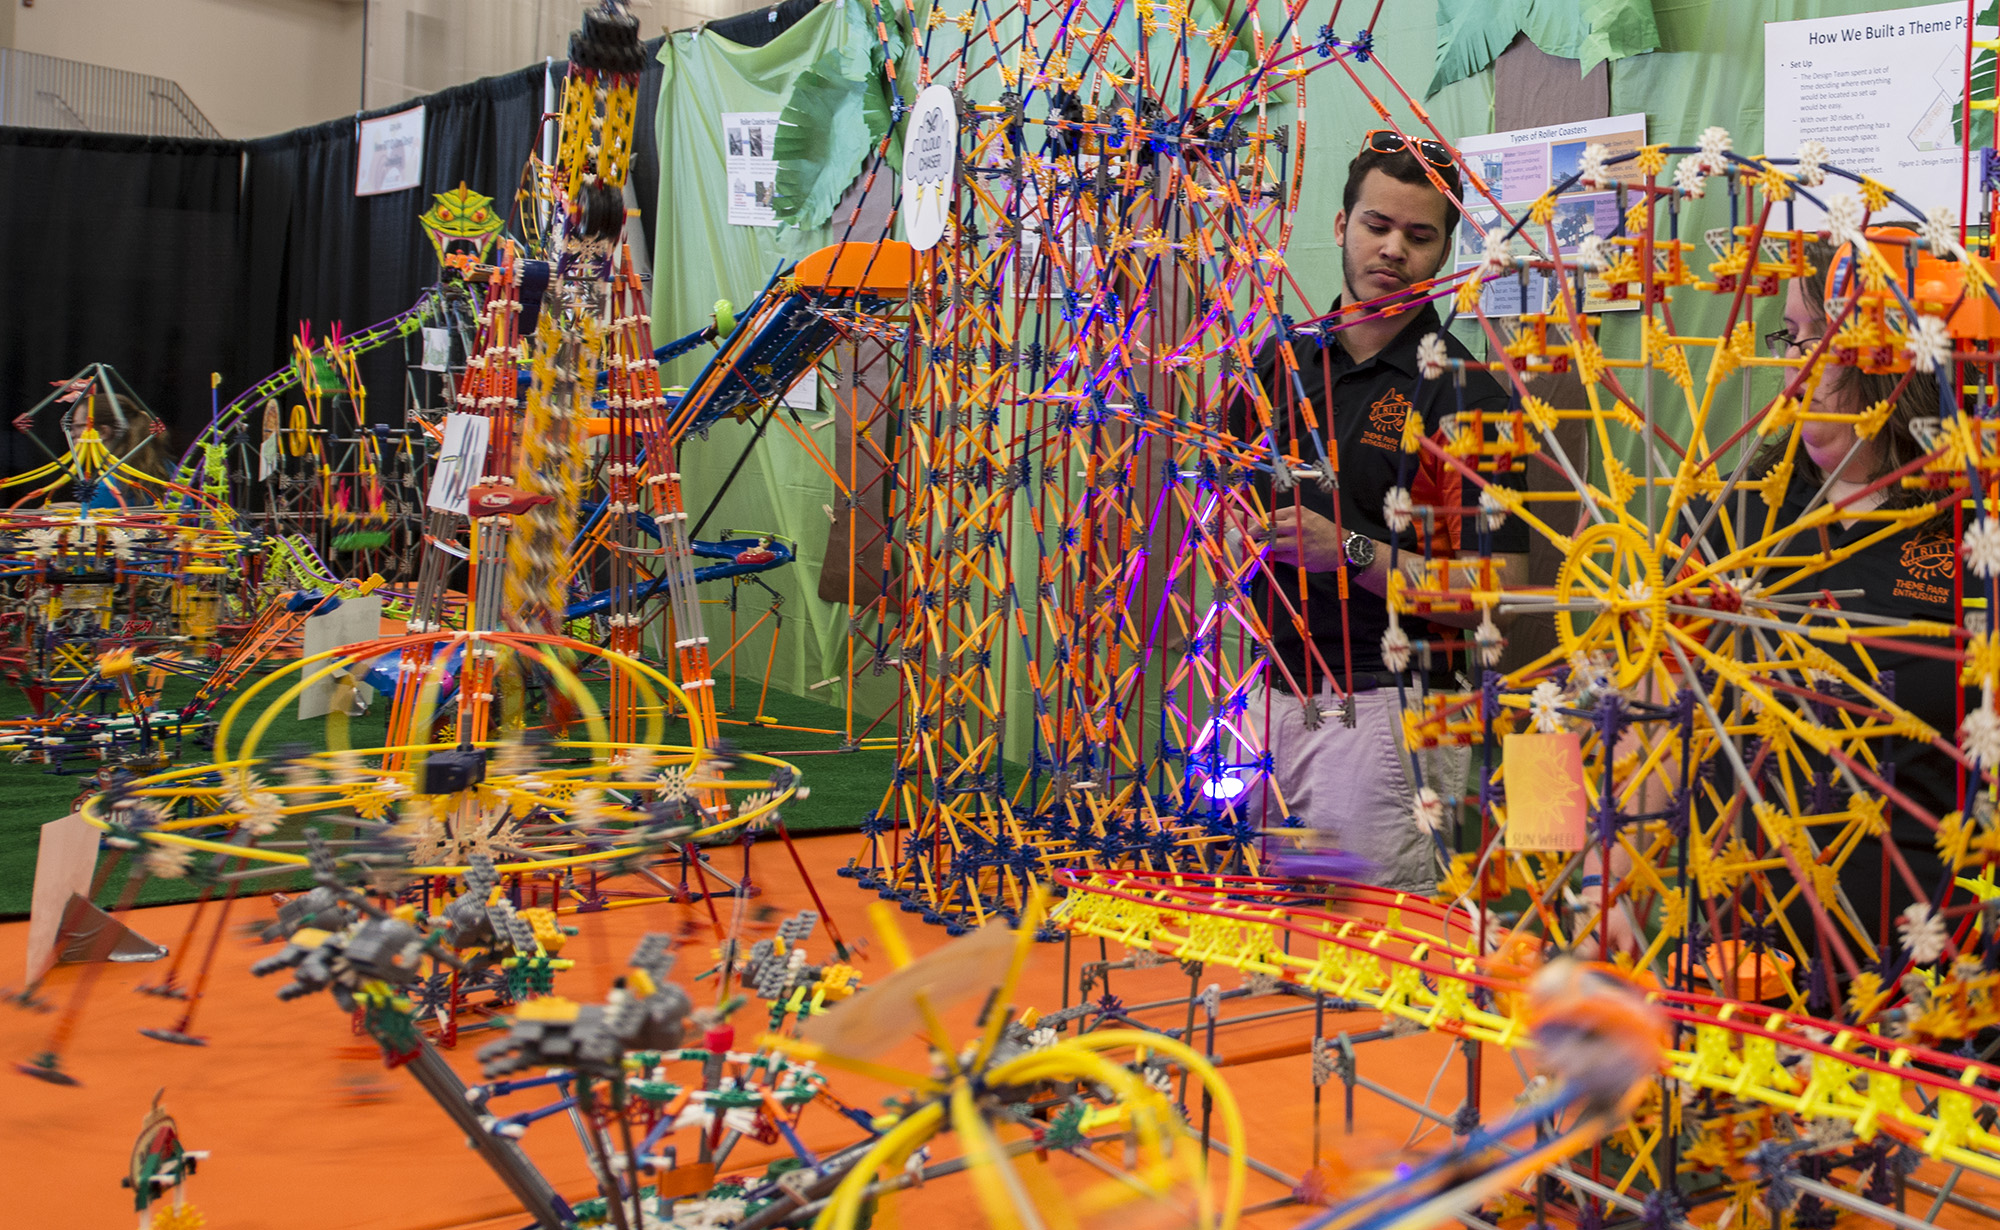 RIT Theme Park Enthusiasts demonstrate their miniature theme park in their Ritchie's Exhibition in the Gordon Field House during Imagine RIT: Innovation and Creativity Festival on the Rochester Institute of Technology campus in Rochester, N.Y., May 7, 2016.  (Photo by Cindy Roblero) #imaginerit #ritpj